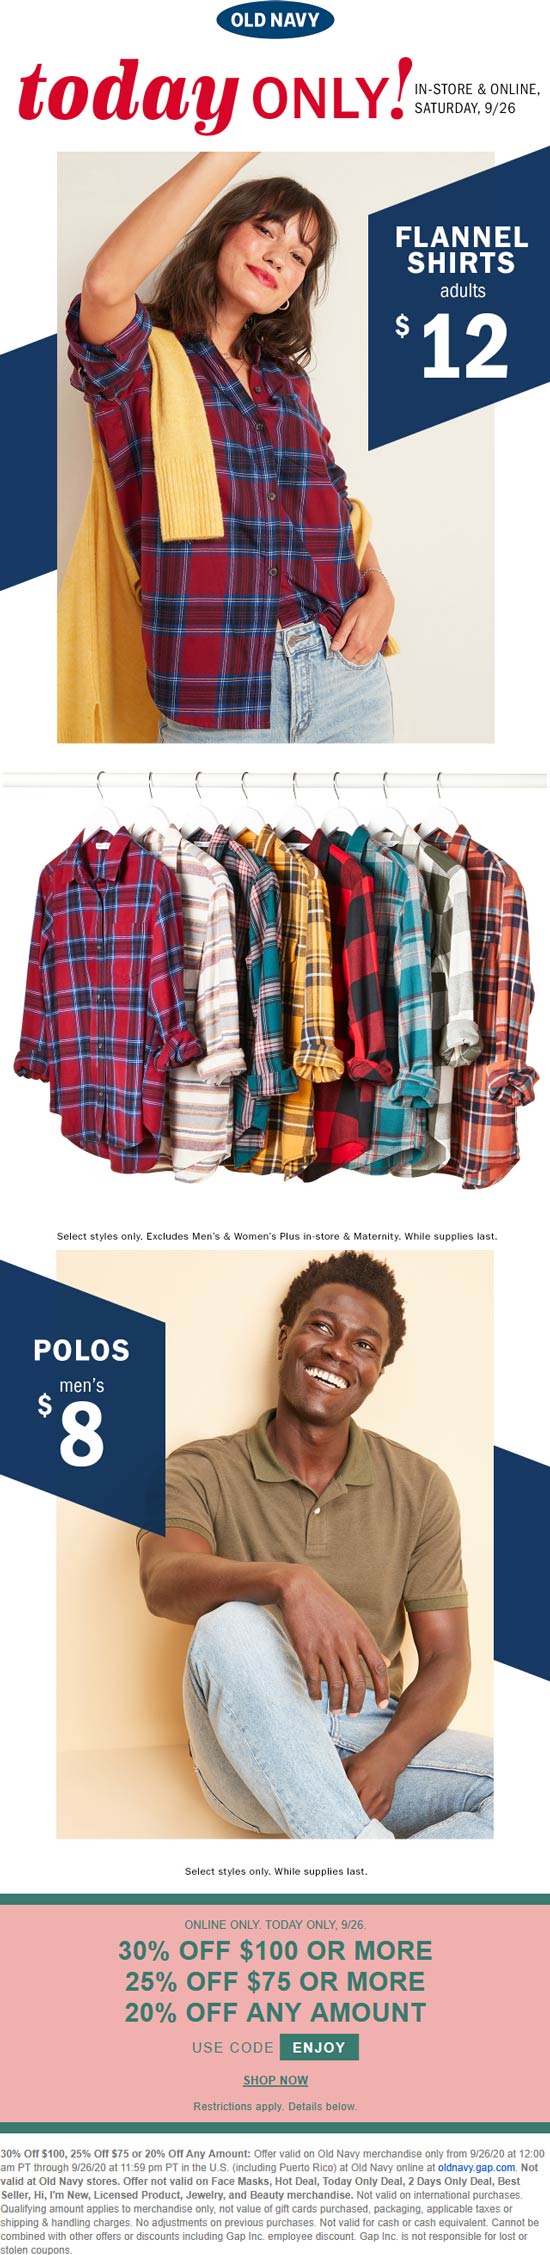 Old Navy stores Coupon  20-30% off & more today at Old Navy via promo code ENJOY #oldnavy 